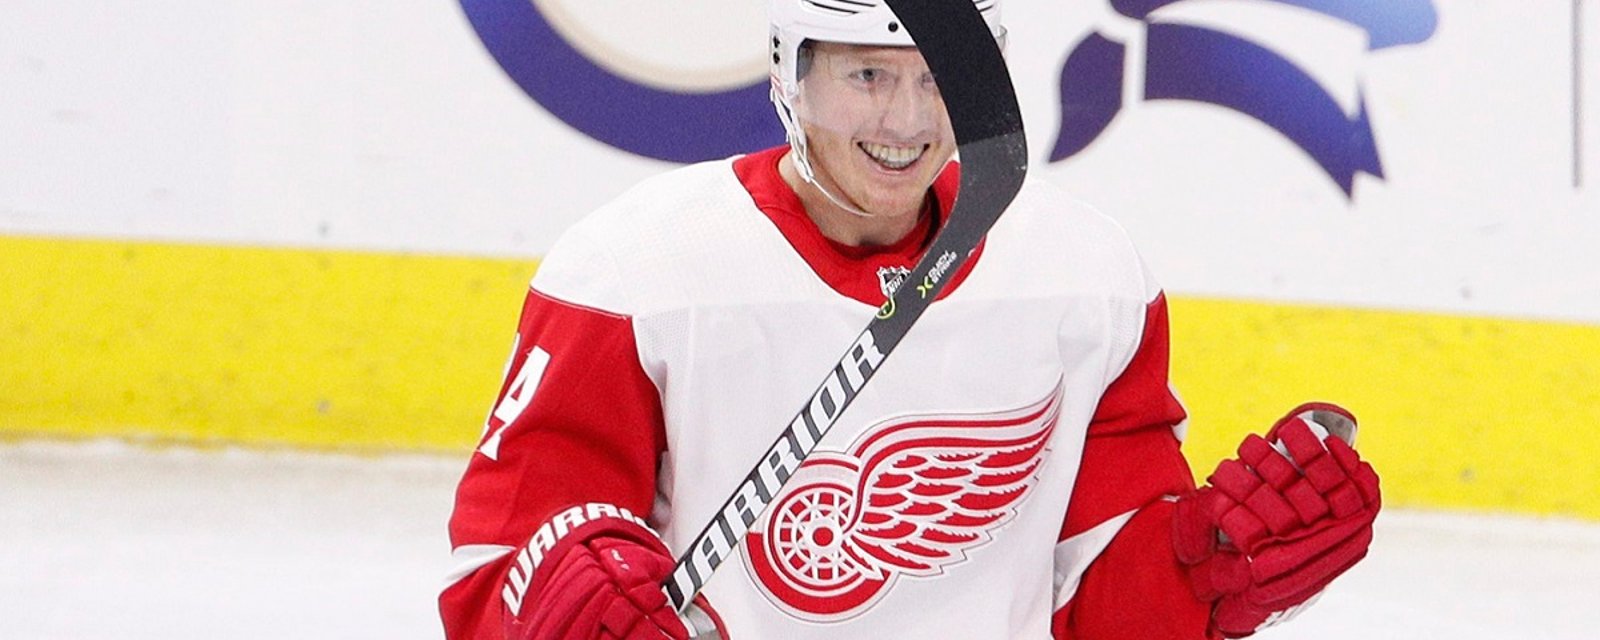 Report: Red Wings have approached Nyquist about a trade.